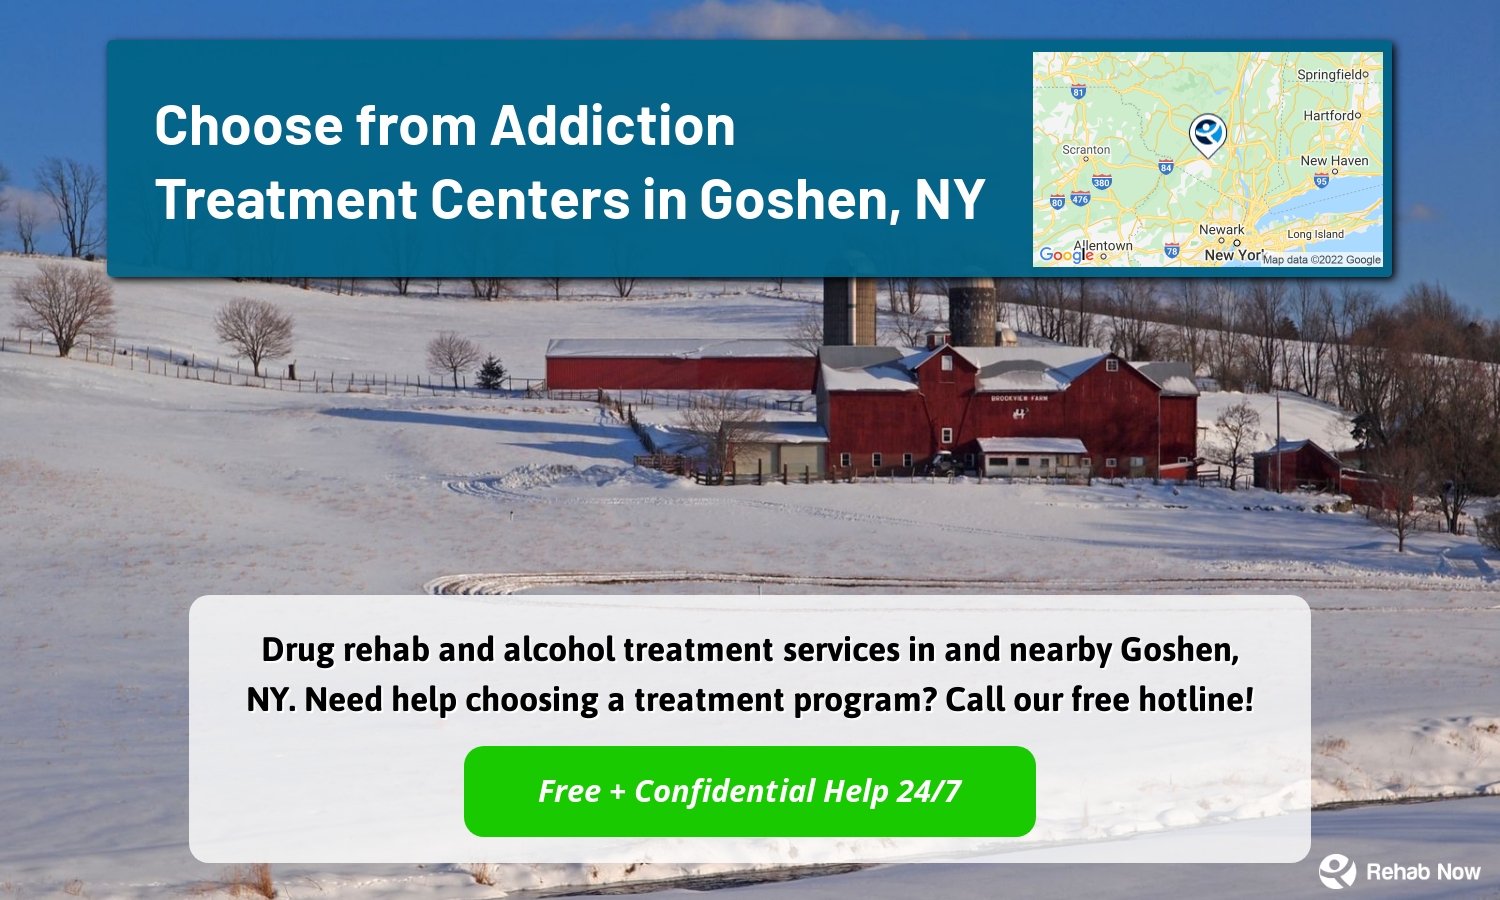 Drug rehab and alcohol treatment services in and nearby Goshen, NY. Need help choosing a treatment program? Call our free hotline!